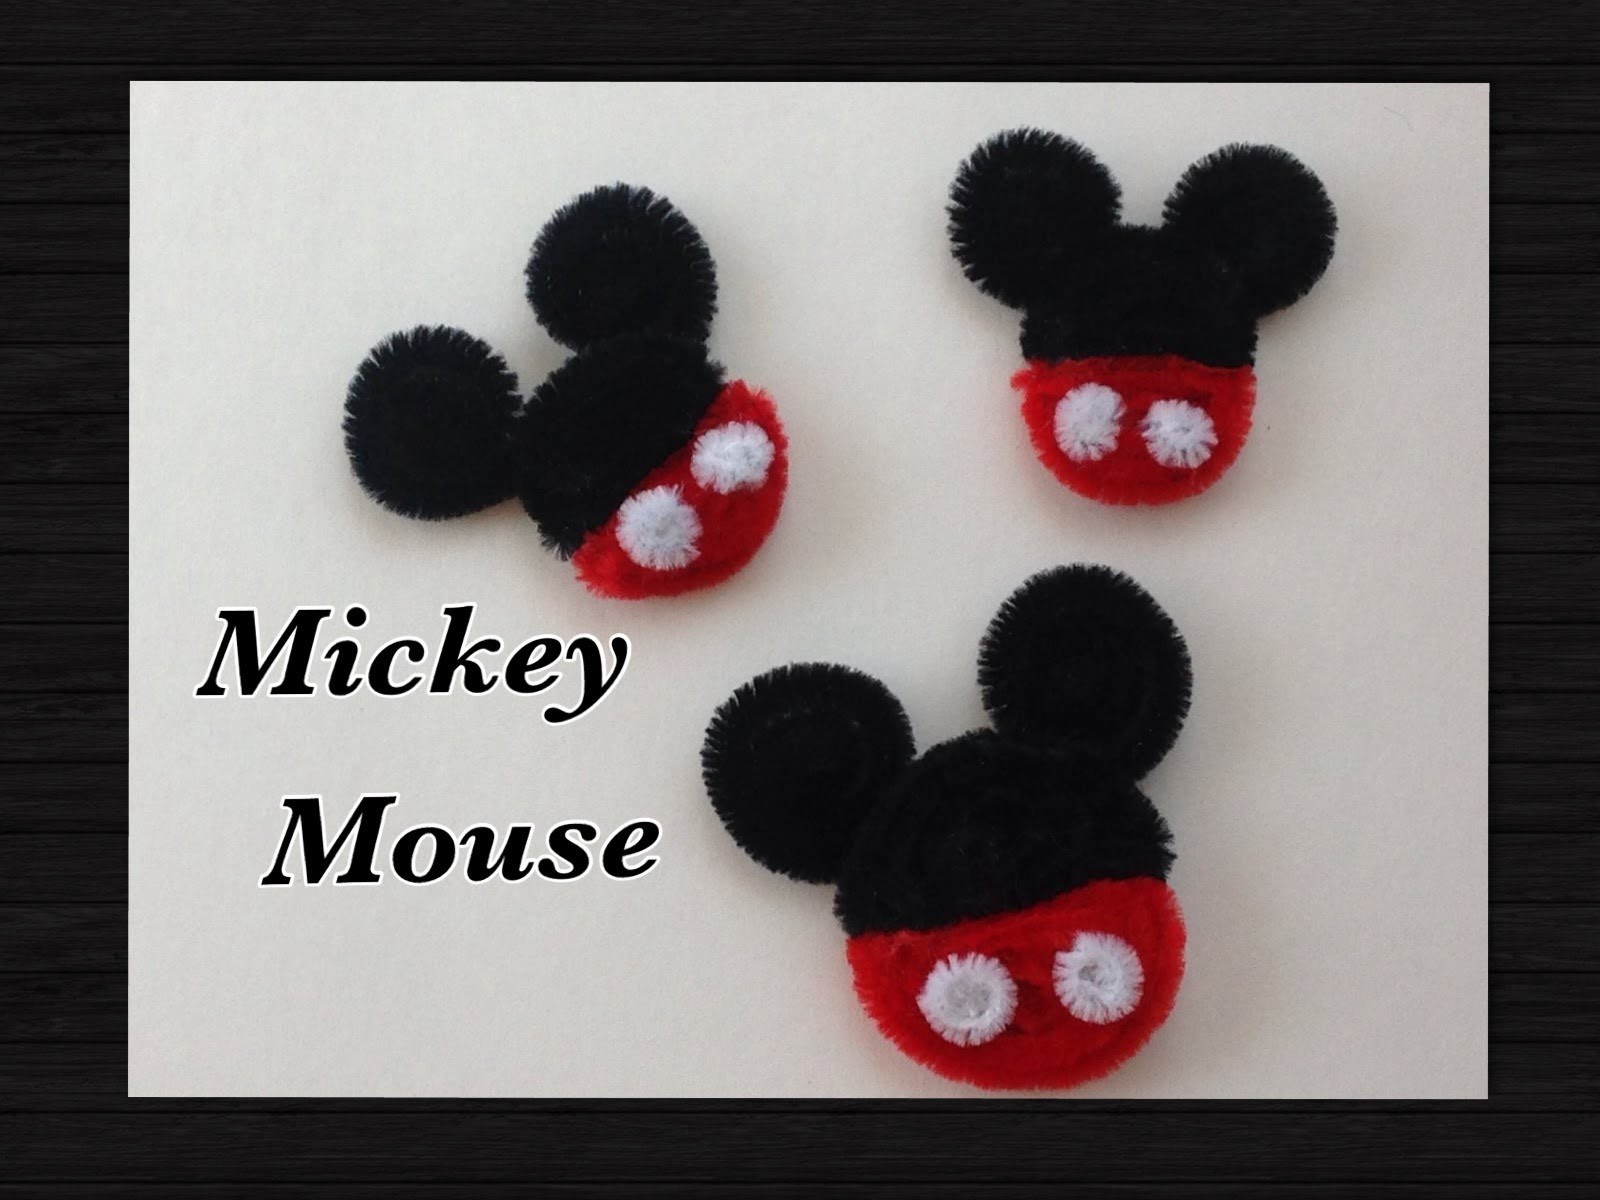 MICKEY MOUSE HECHO CON  LIMPIA PIPAS.- PIPE CLEANER MICKEY MOUSE .